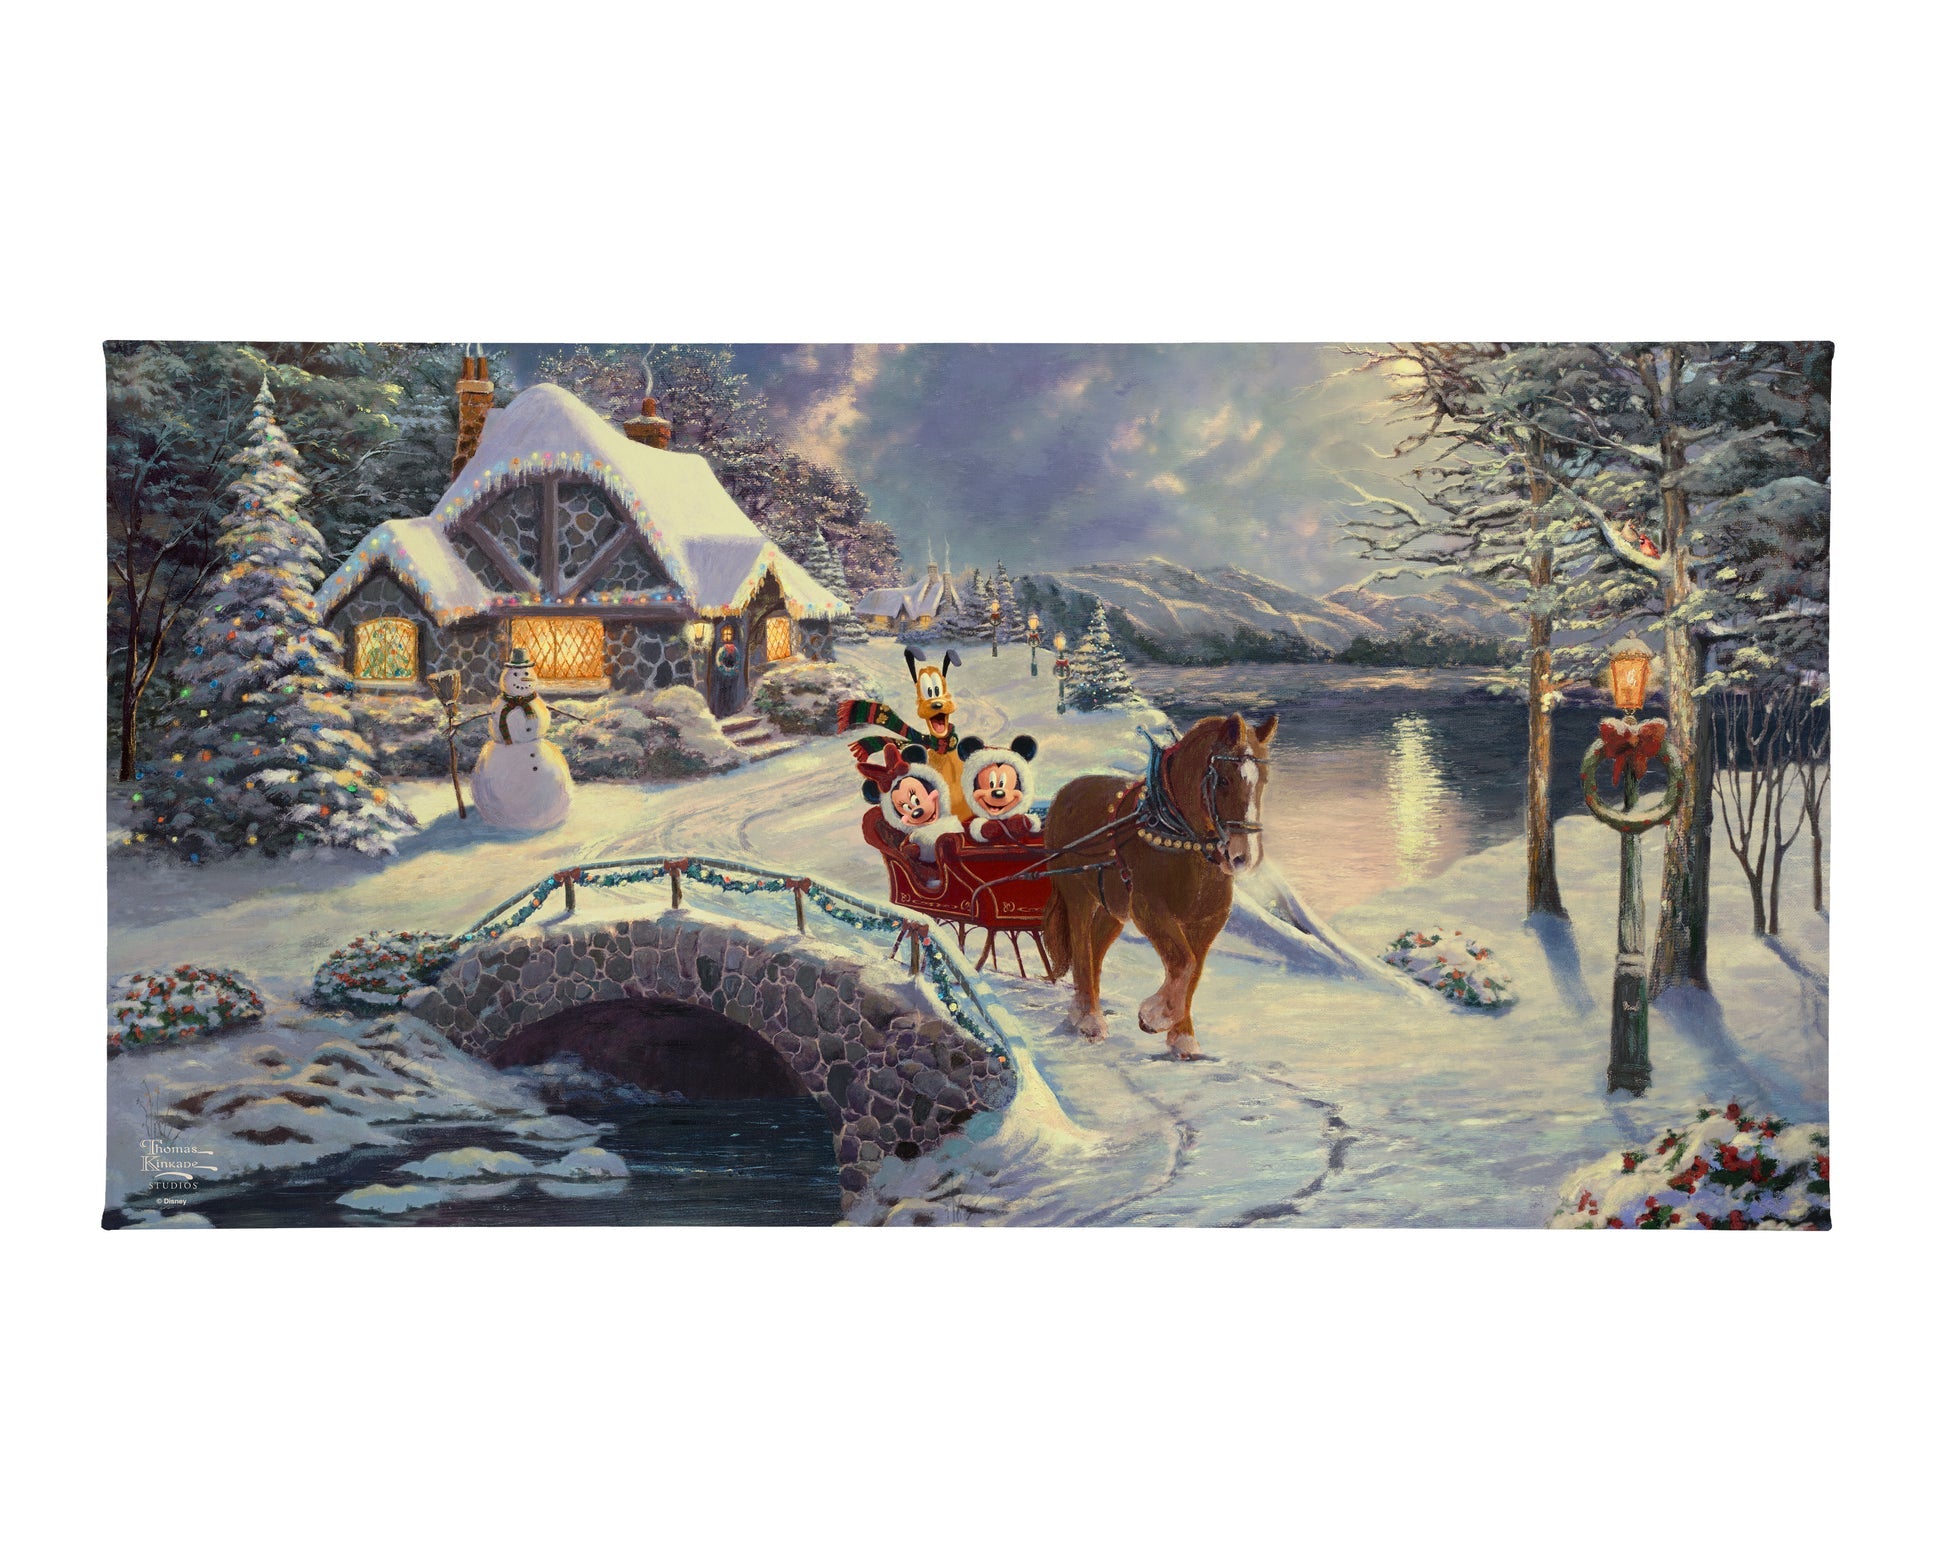 The two are enjoying a bundled-up sleigh ride.